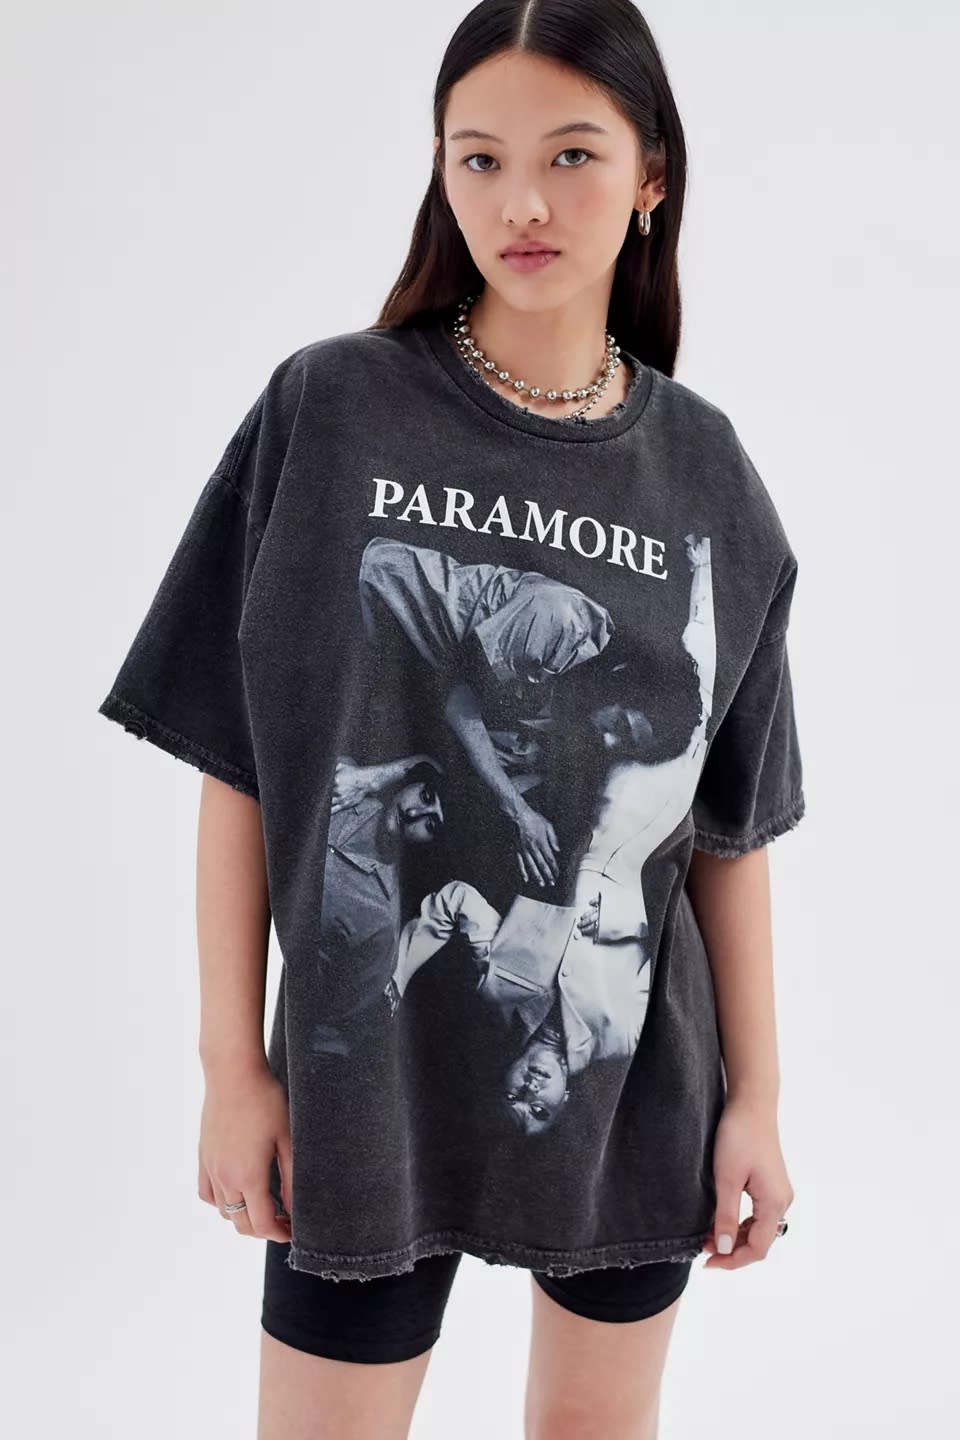 Model wearing black and white Paramore t-shirt